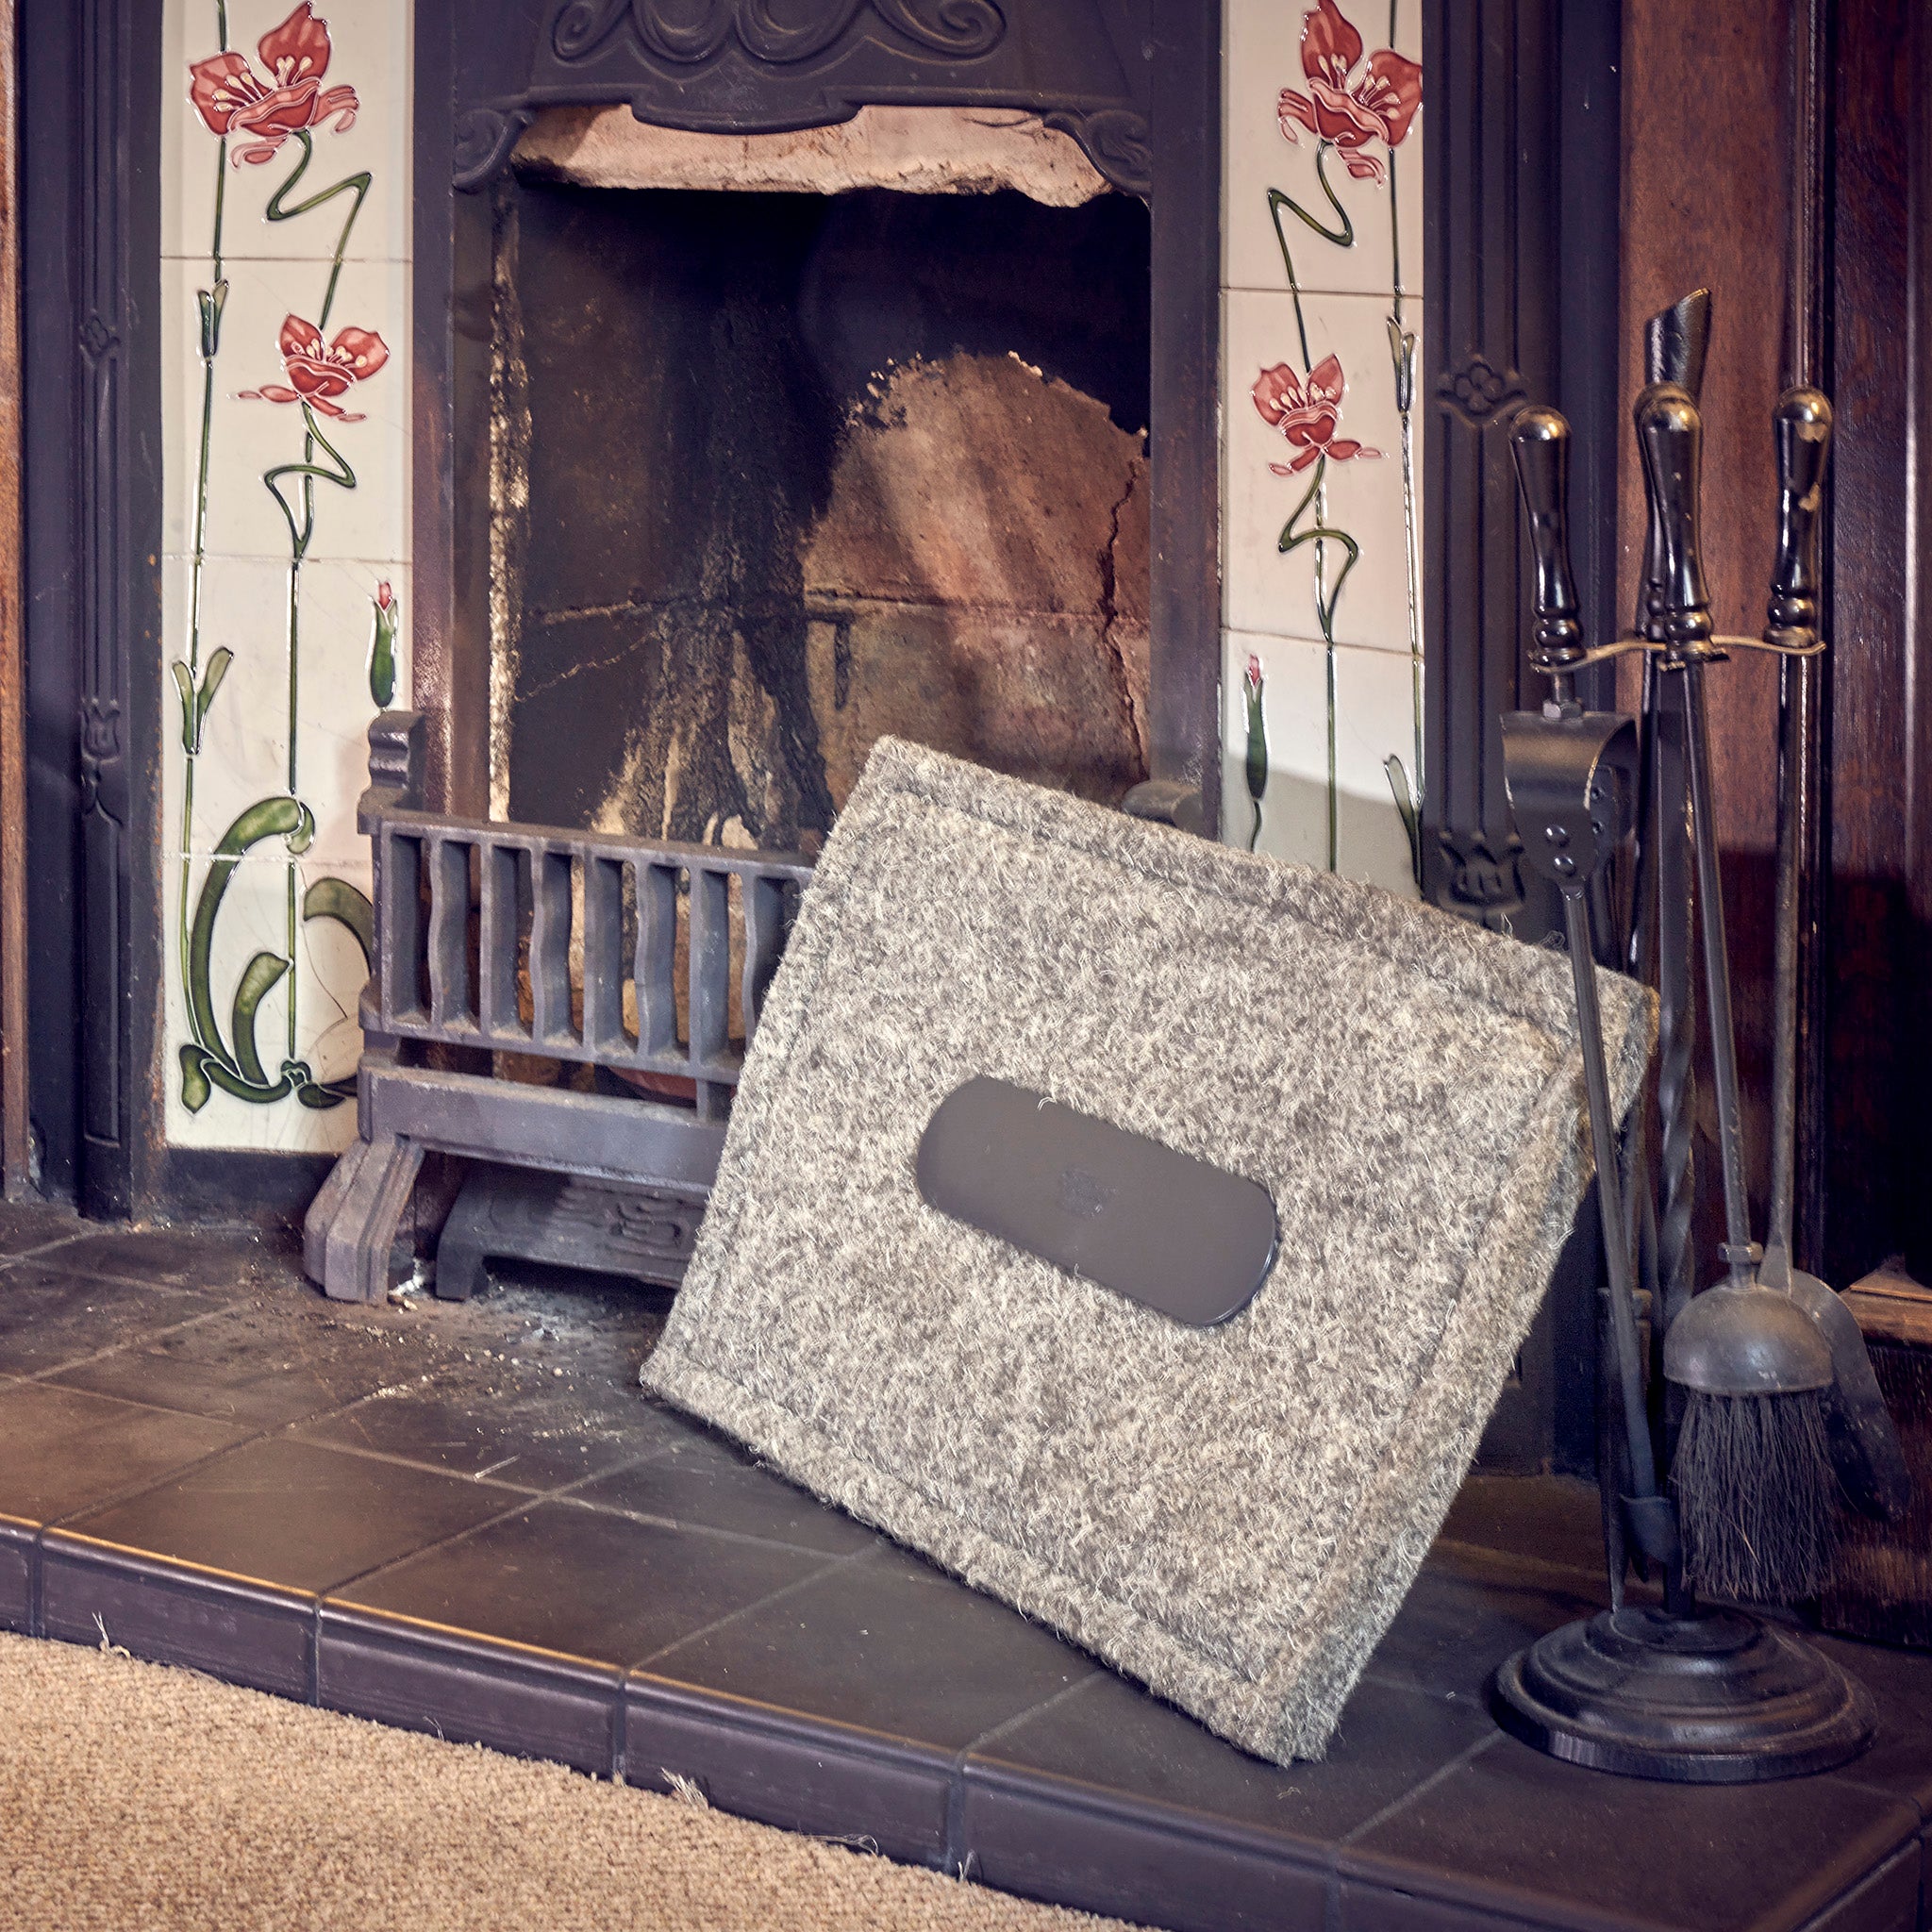 A removable Chimney Sheep chimney draught excluder. Removed ready for the fireplace to be used